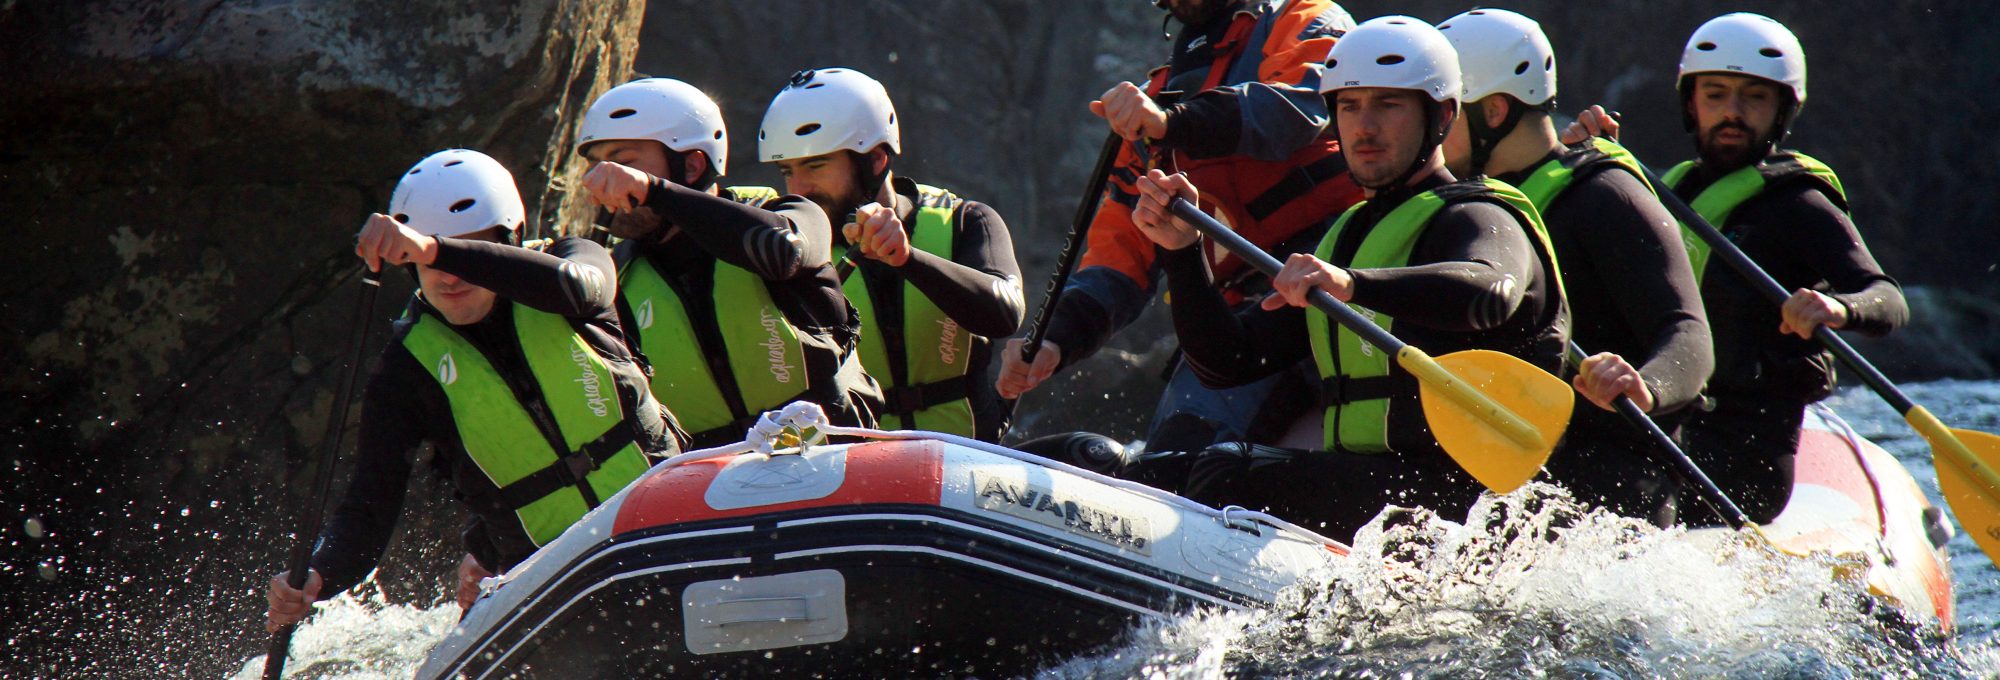 White Water Rafting on the Paiva River with the company Just Come Adventure Tours. Arouca, Portugal.